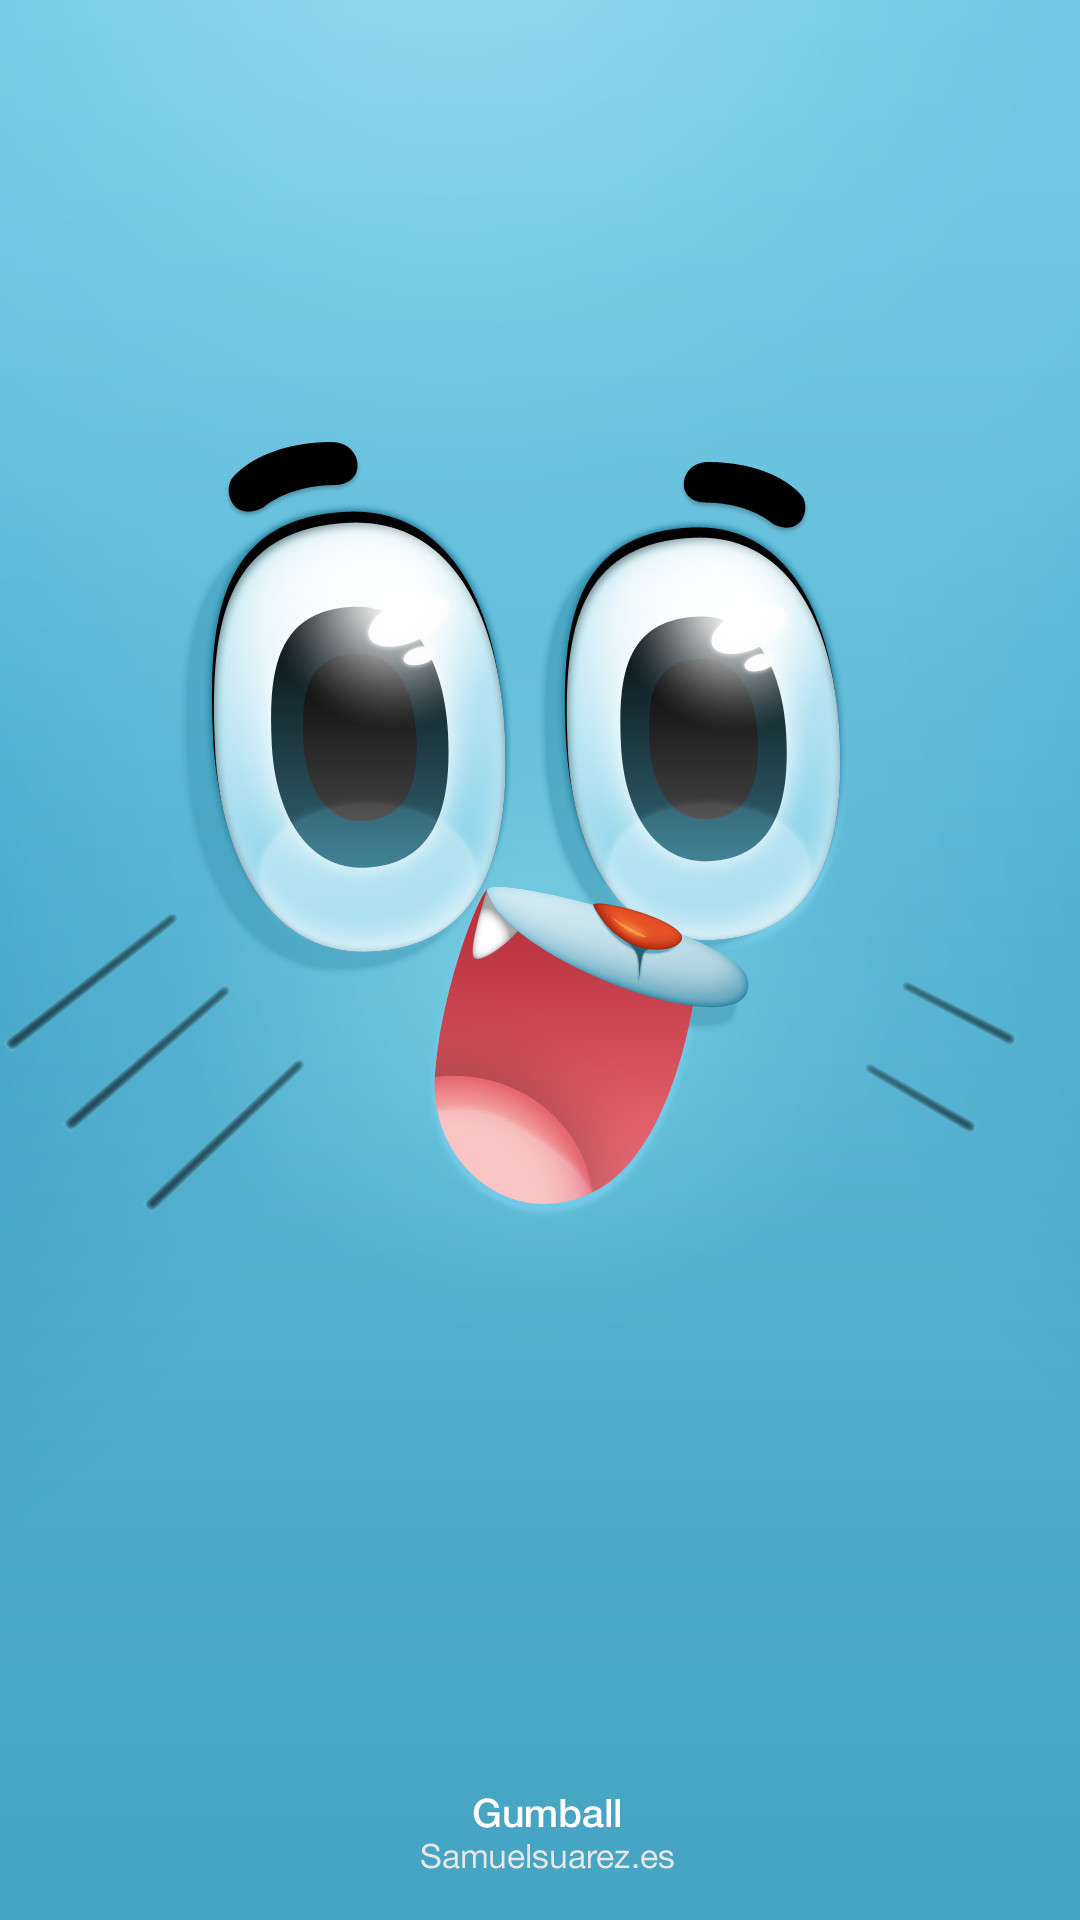 1080x1920 Wallpaper Gumball by Samuel Suarez. Find this Pin and more on The Amazing  World ...